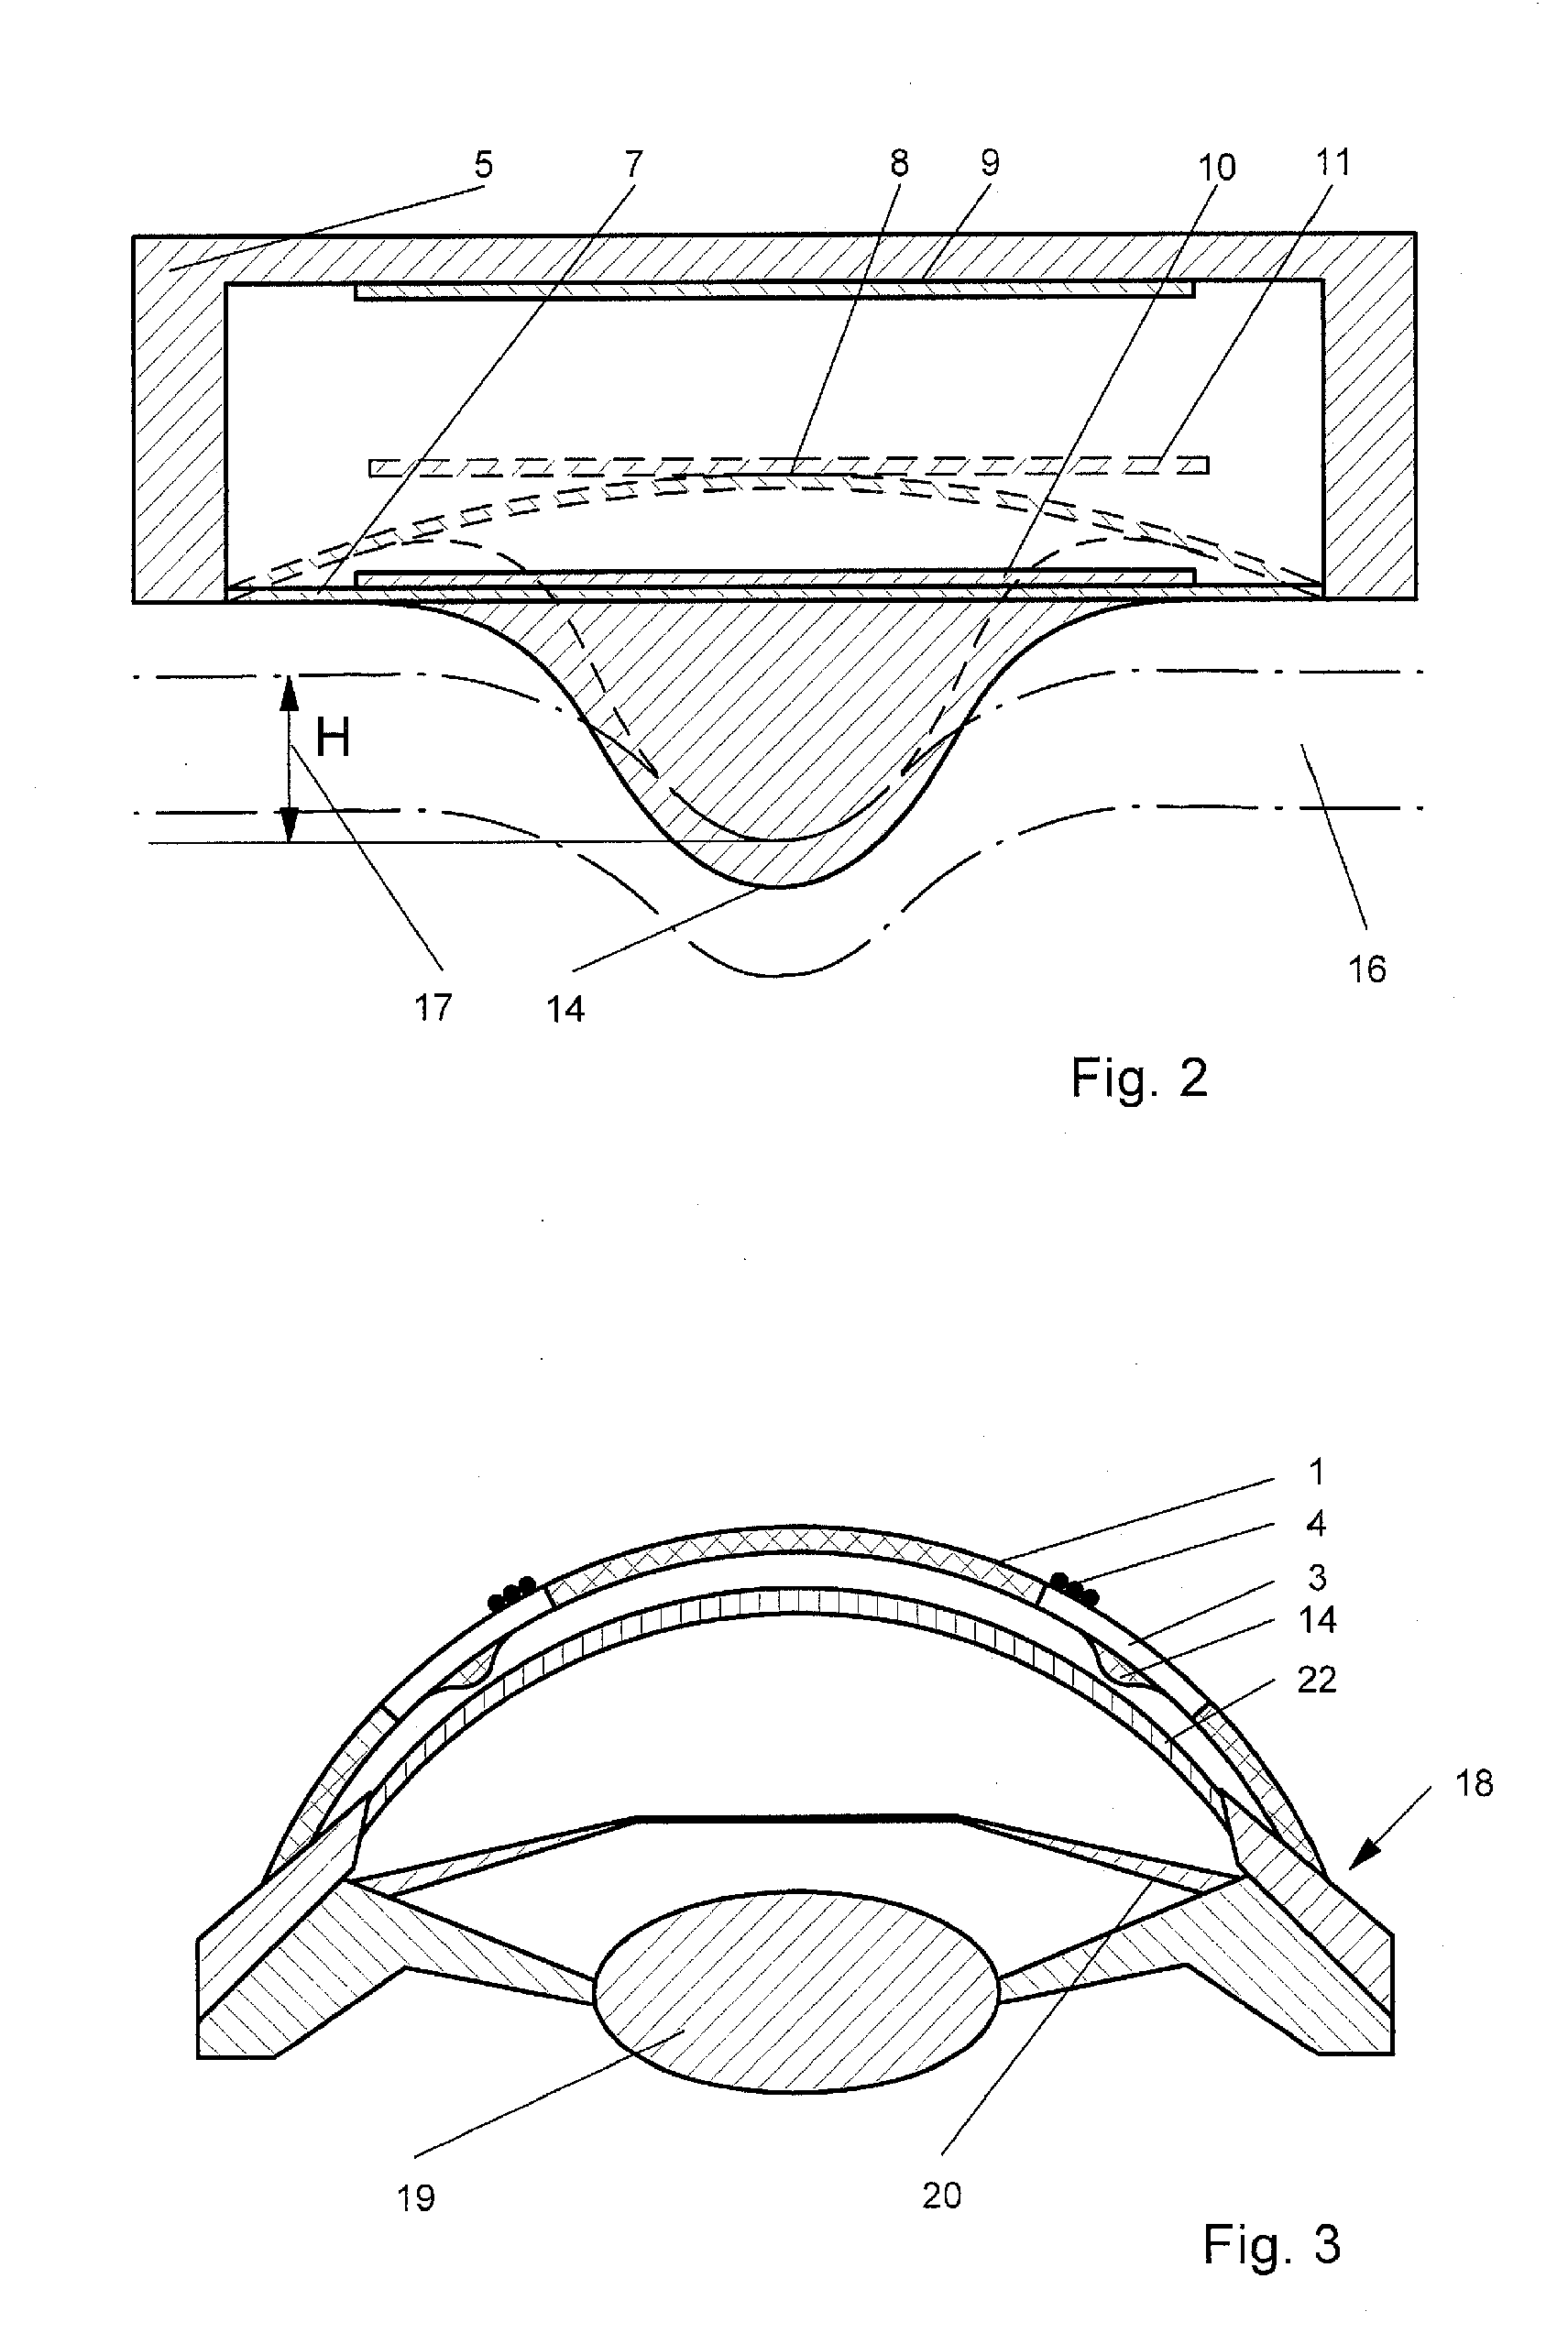 Method and device for monitoring biomechanical properties of the eye